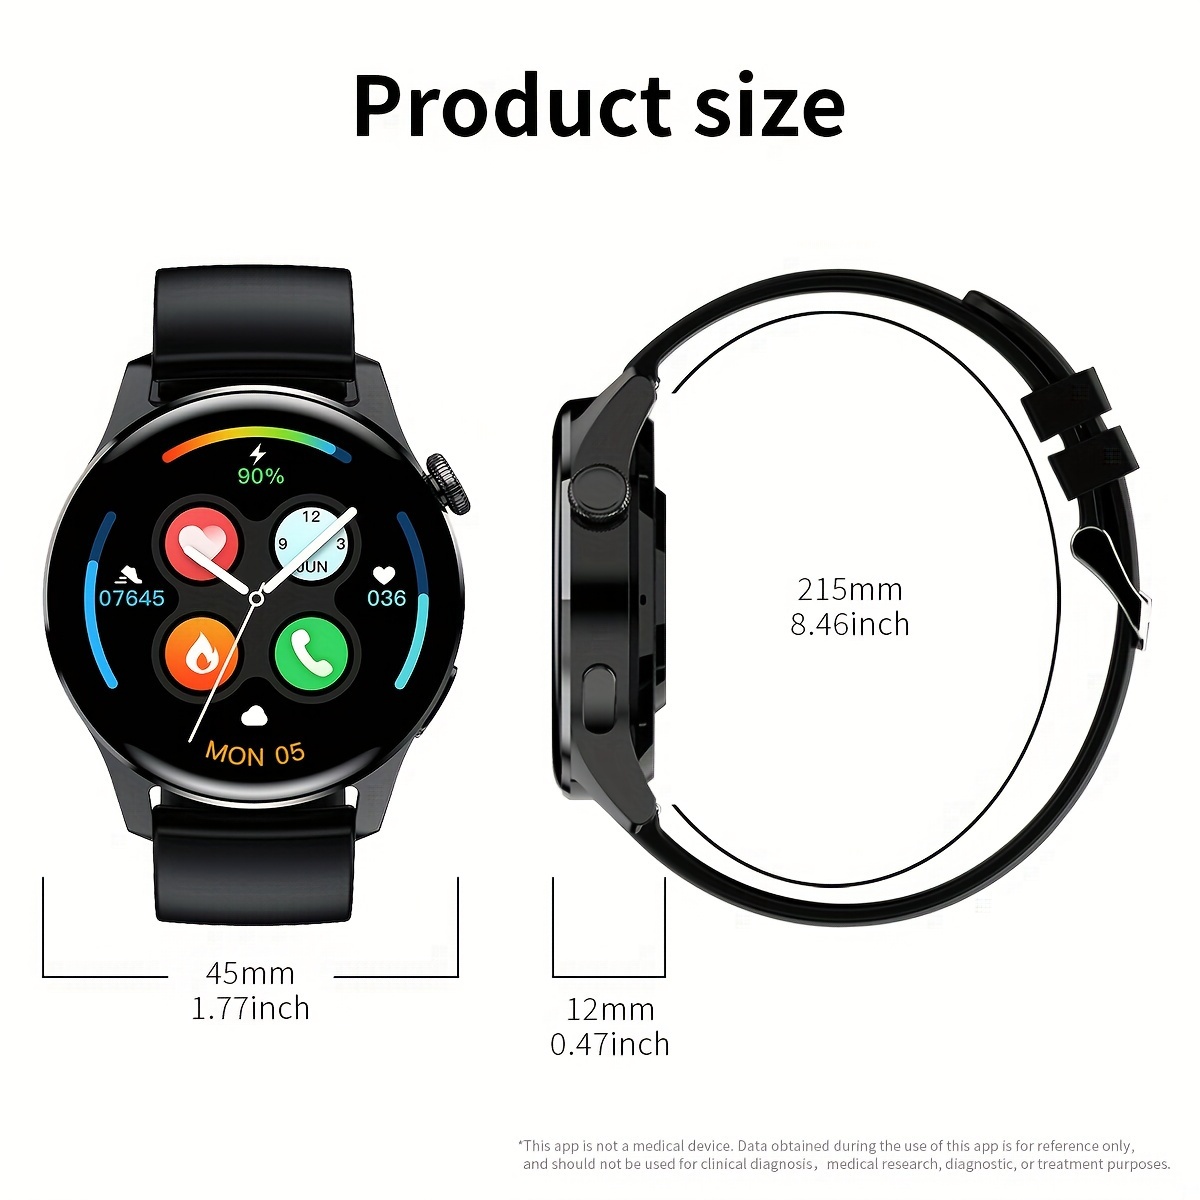 smart watch answer make call 1 28 round colorful display screen with sports pedometer calorie consumption track record exercise time play music multiple sport modes waterproof watches for android iphone